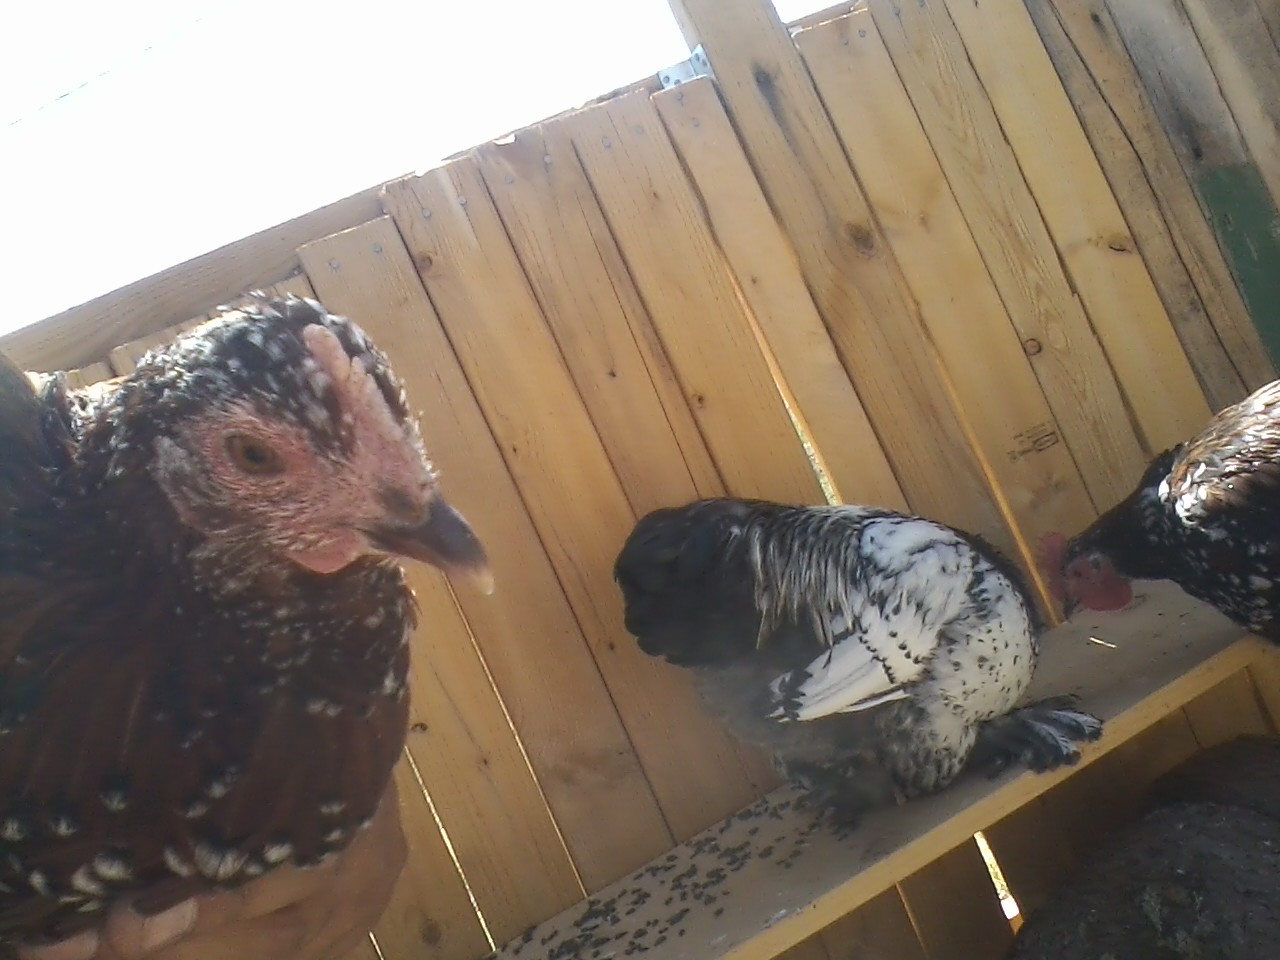 It's Polly-Jean Featherbottom, my female speckled sussex.